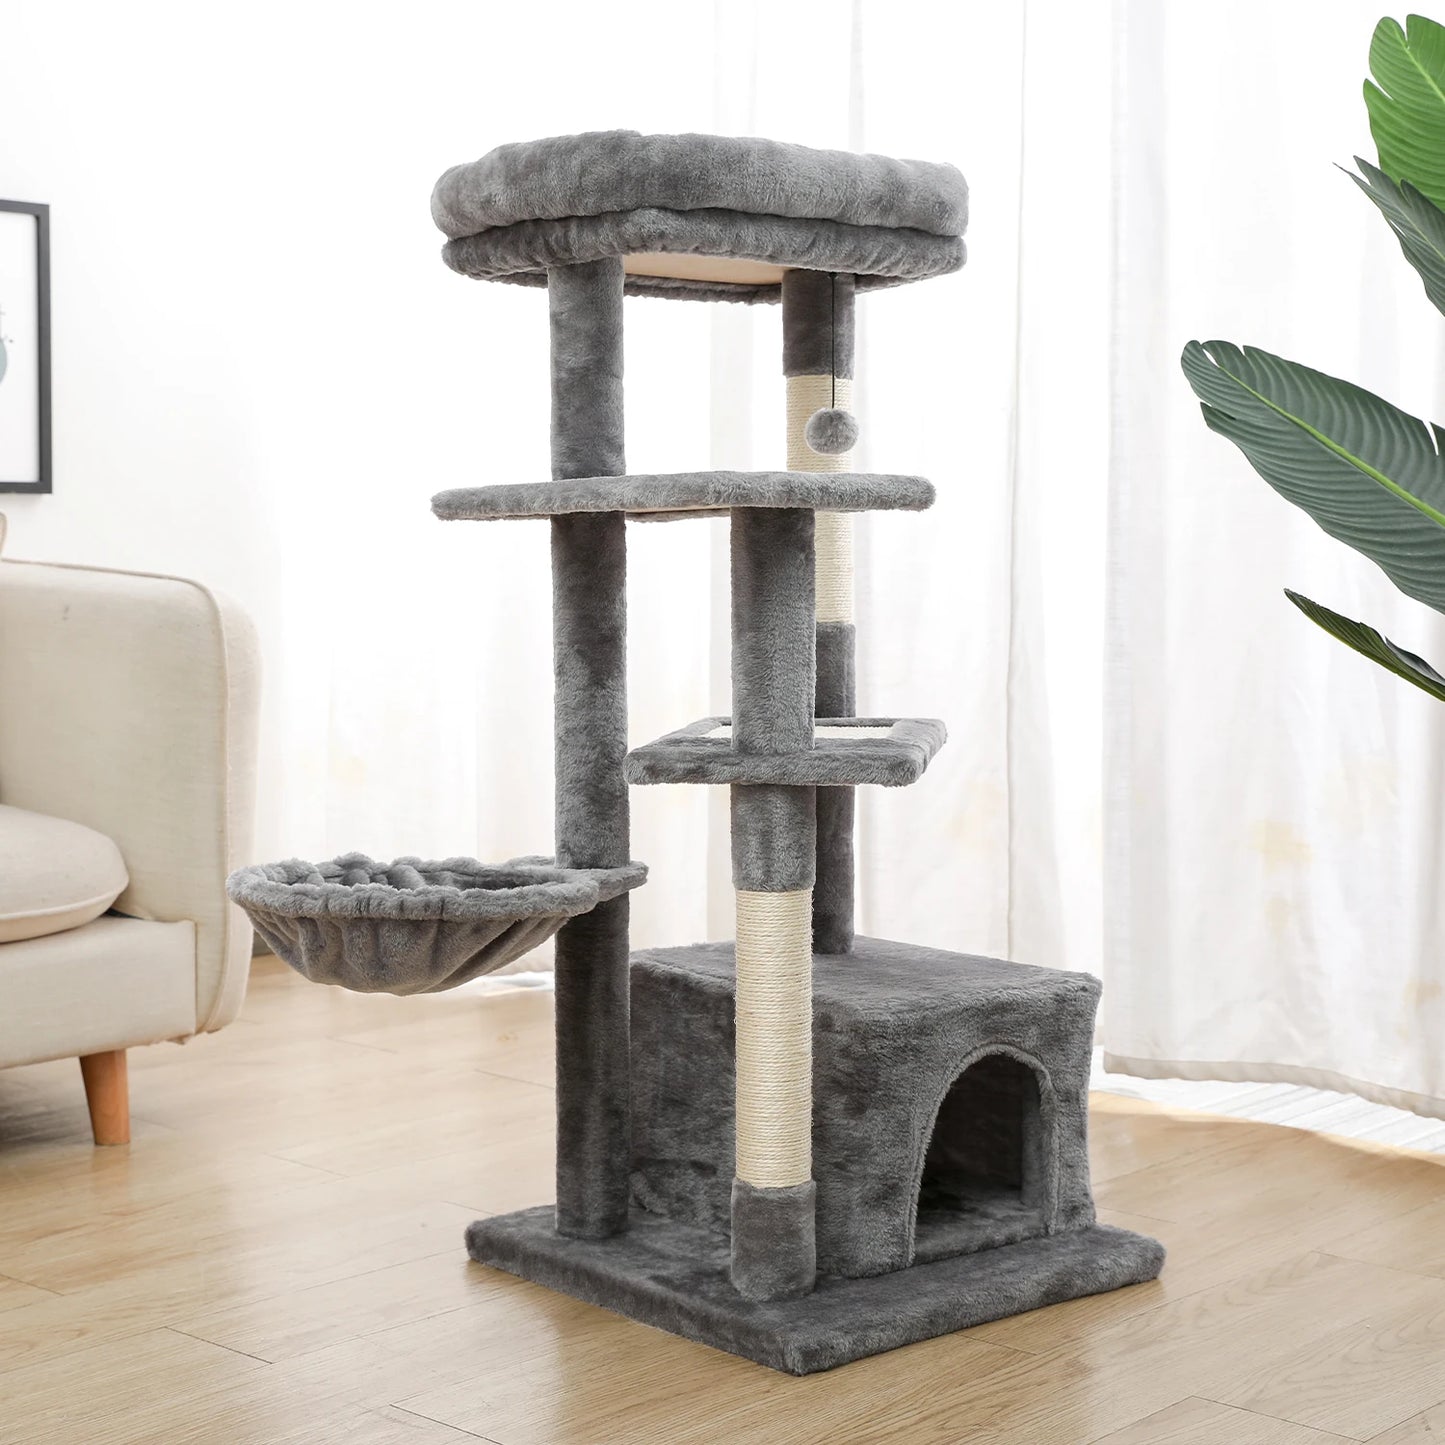 Gray cat tree with a niche and two baskets